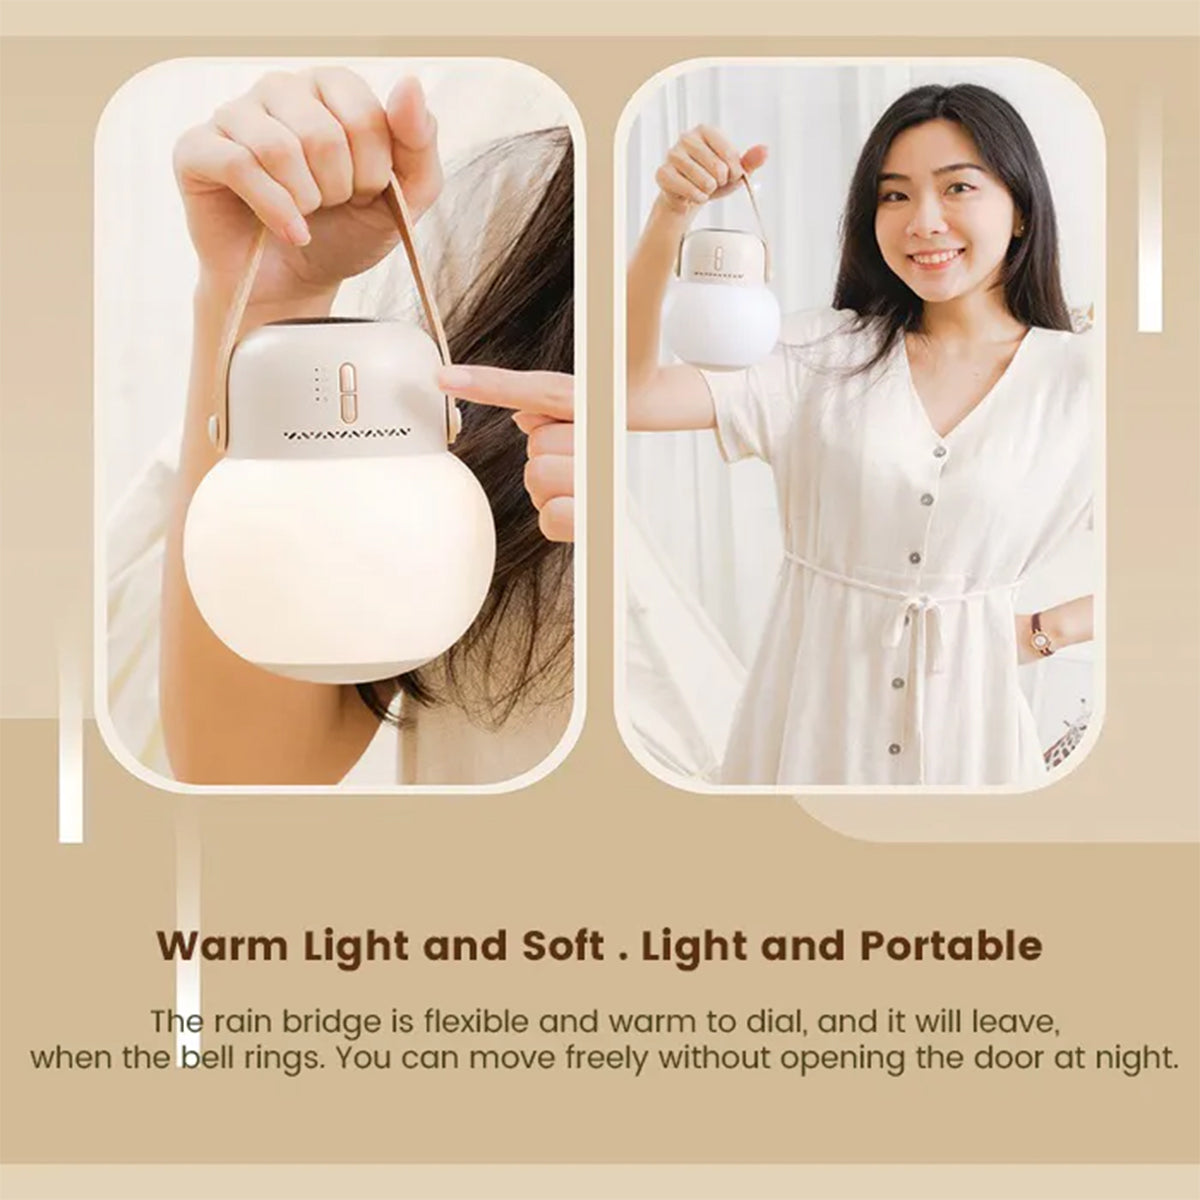 O2W SELECTION SOTHING Fun Portable Mosquito Repellent Lamp, White